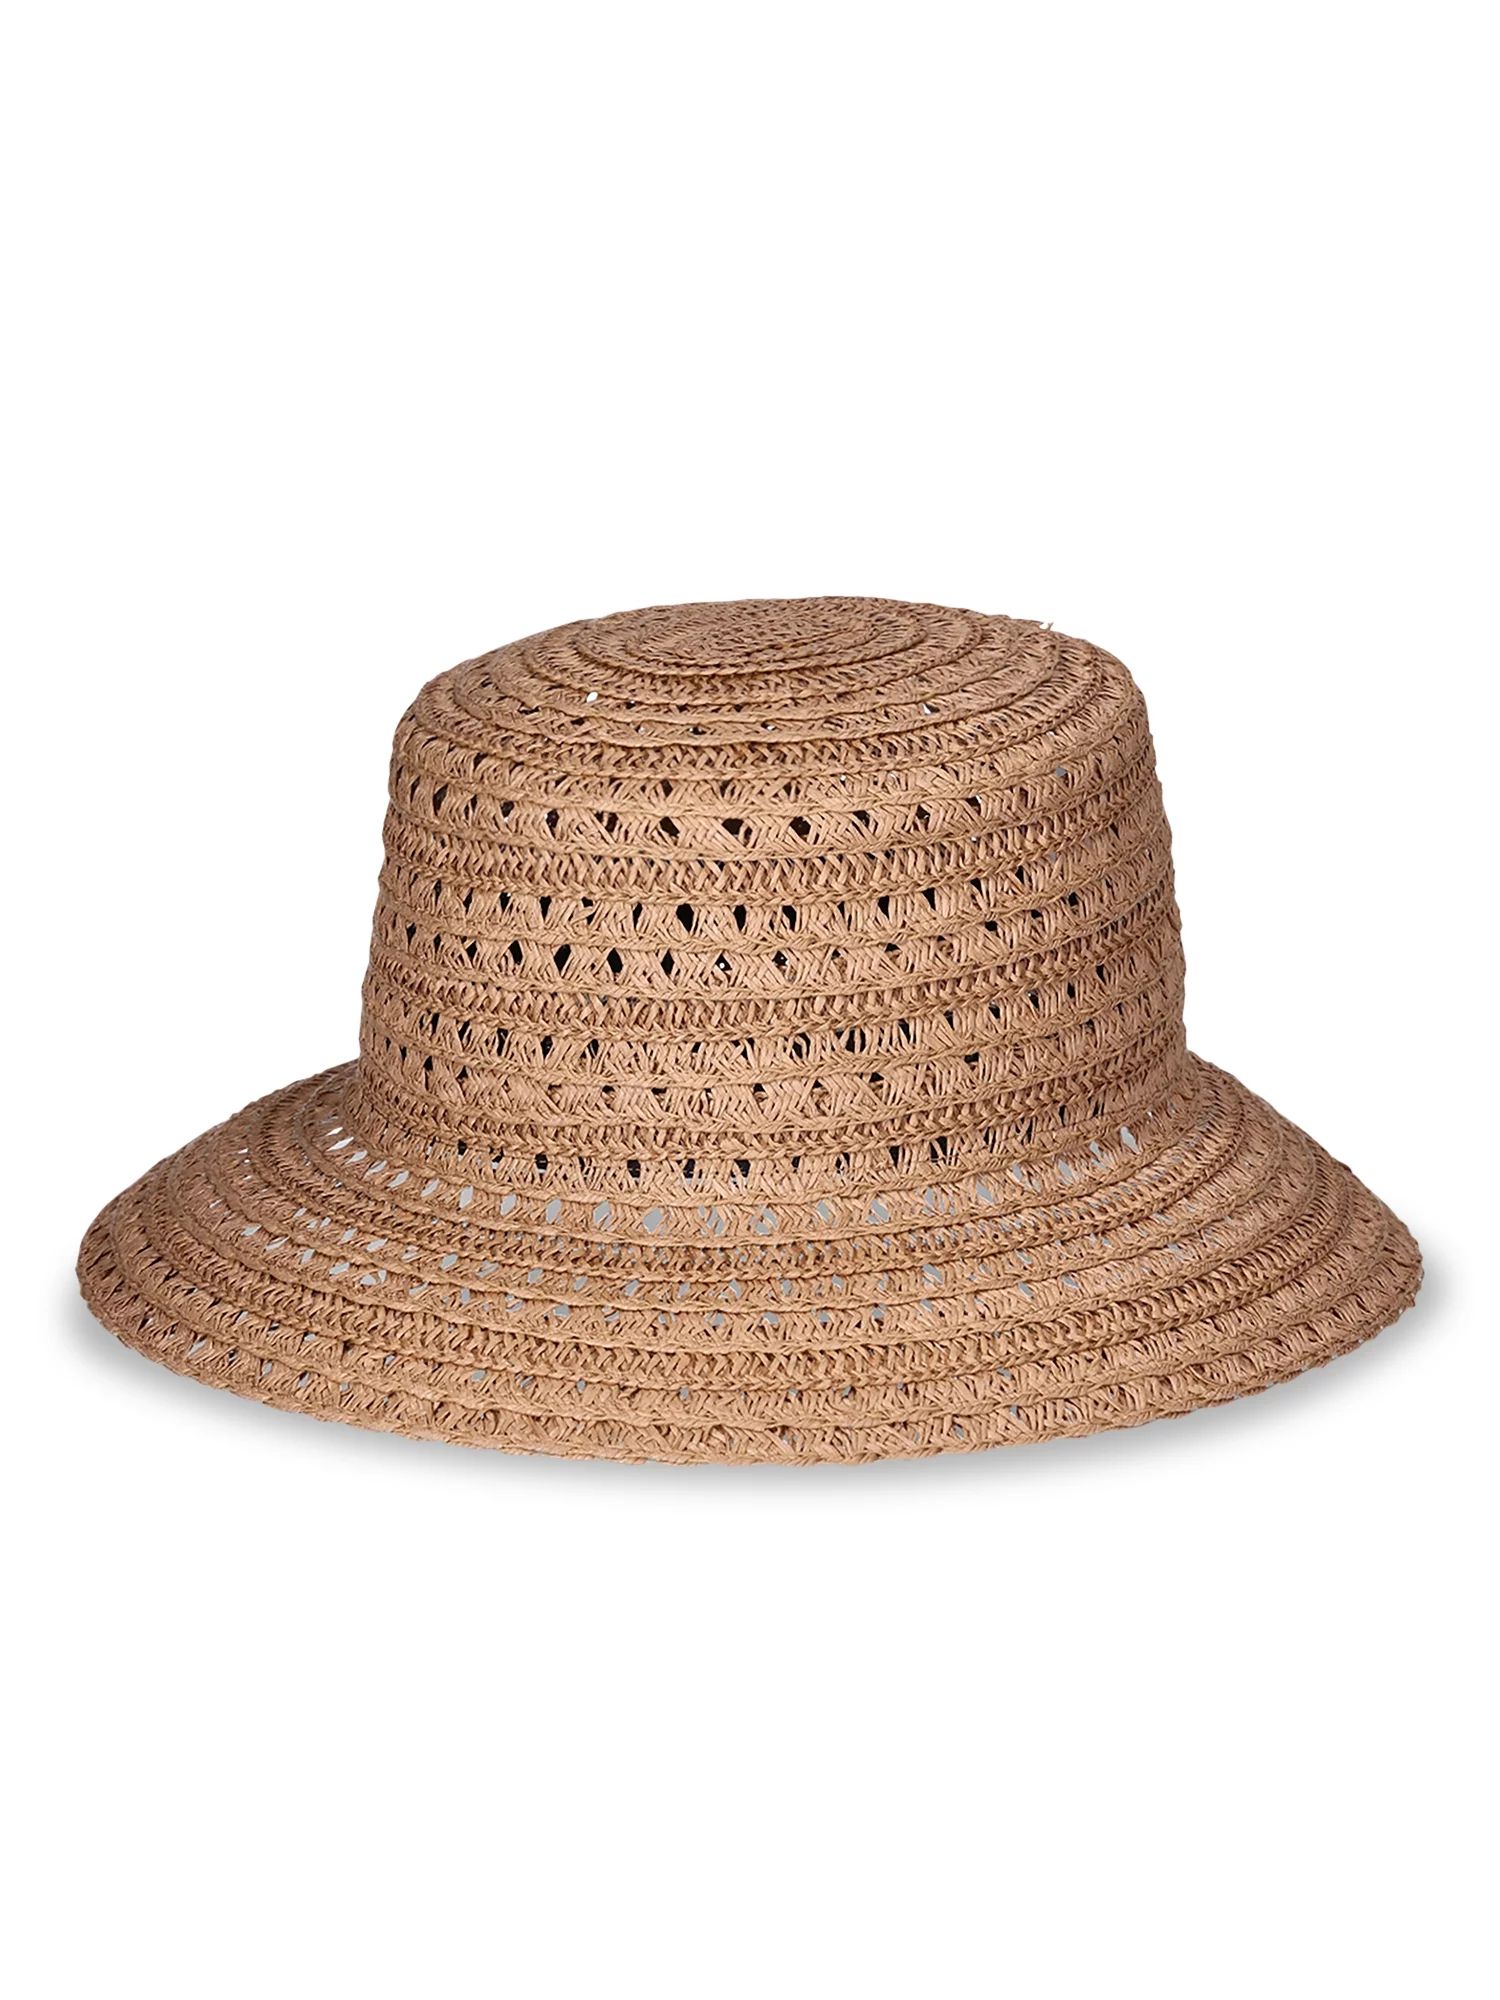 Time & Tru Women's Bucket Hat, Solid Color, Paper Straw Woven Construction, 1 Pack | Walmart (US)